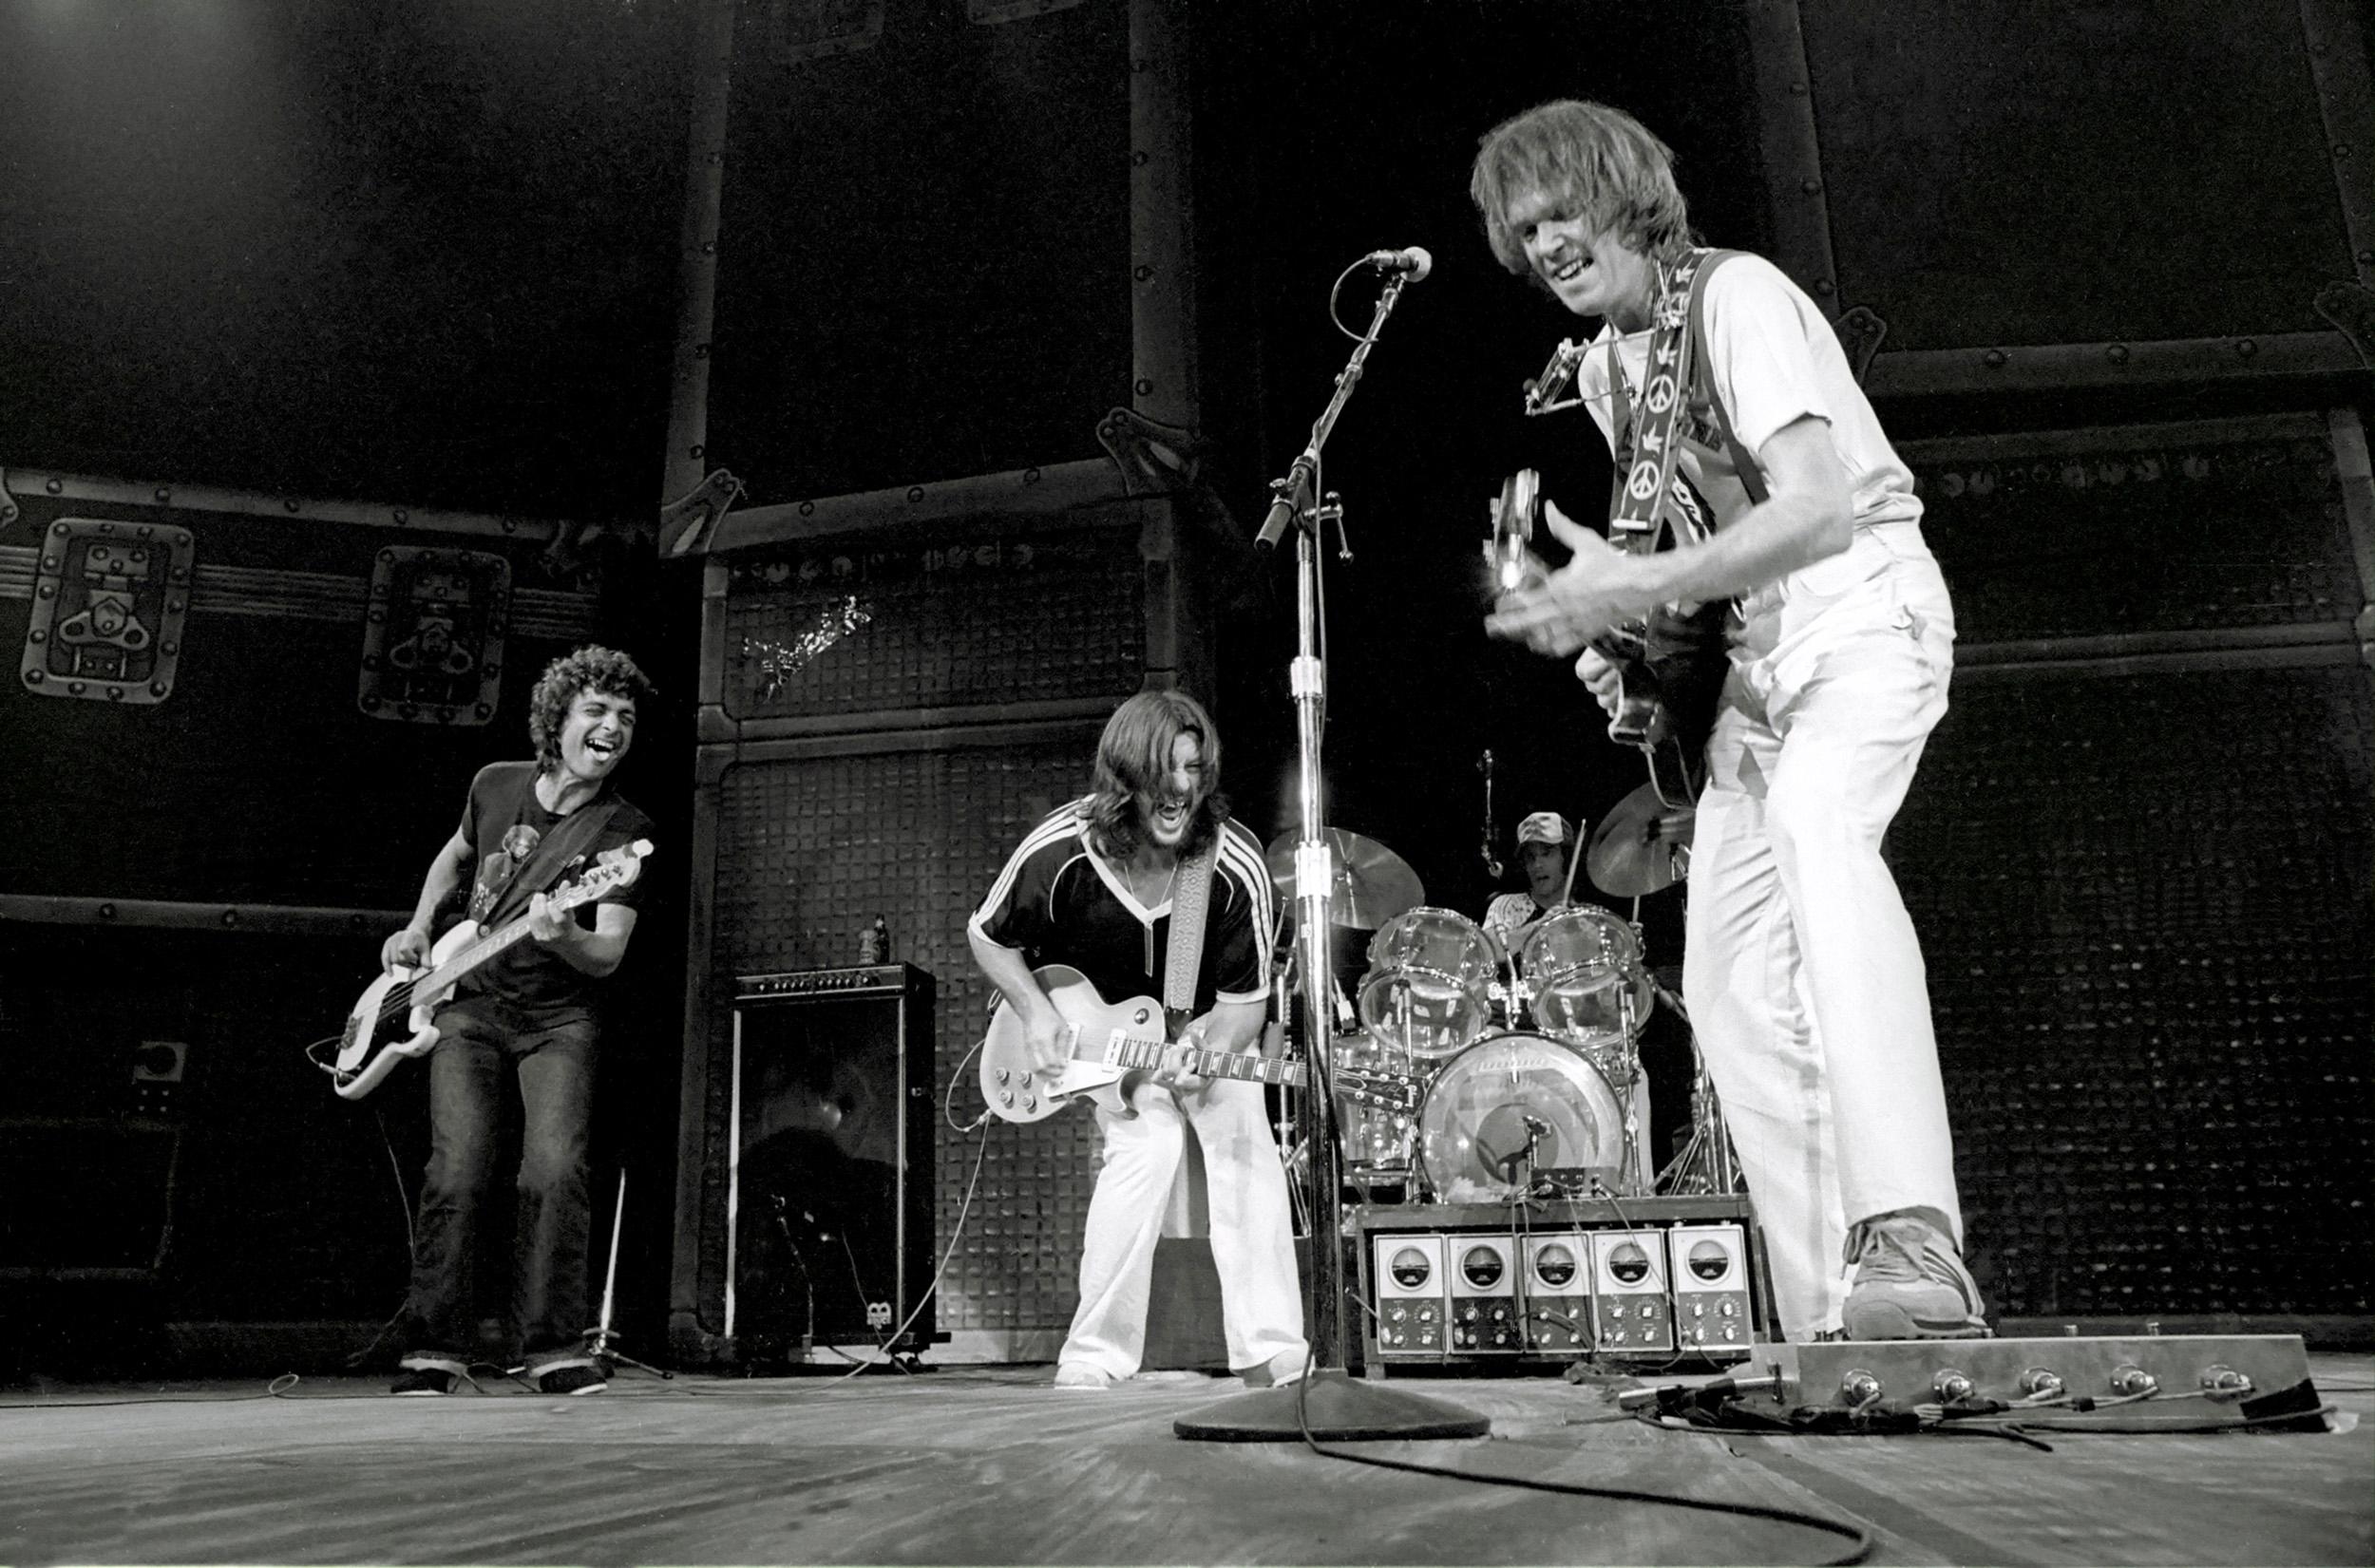 Richard E. Aaron Black and White Photograph - Neil Young Performing with Band